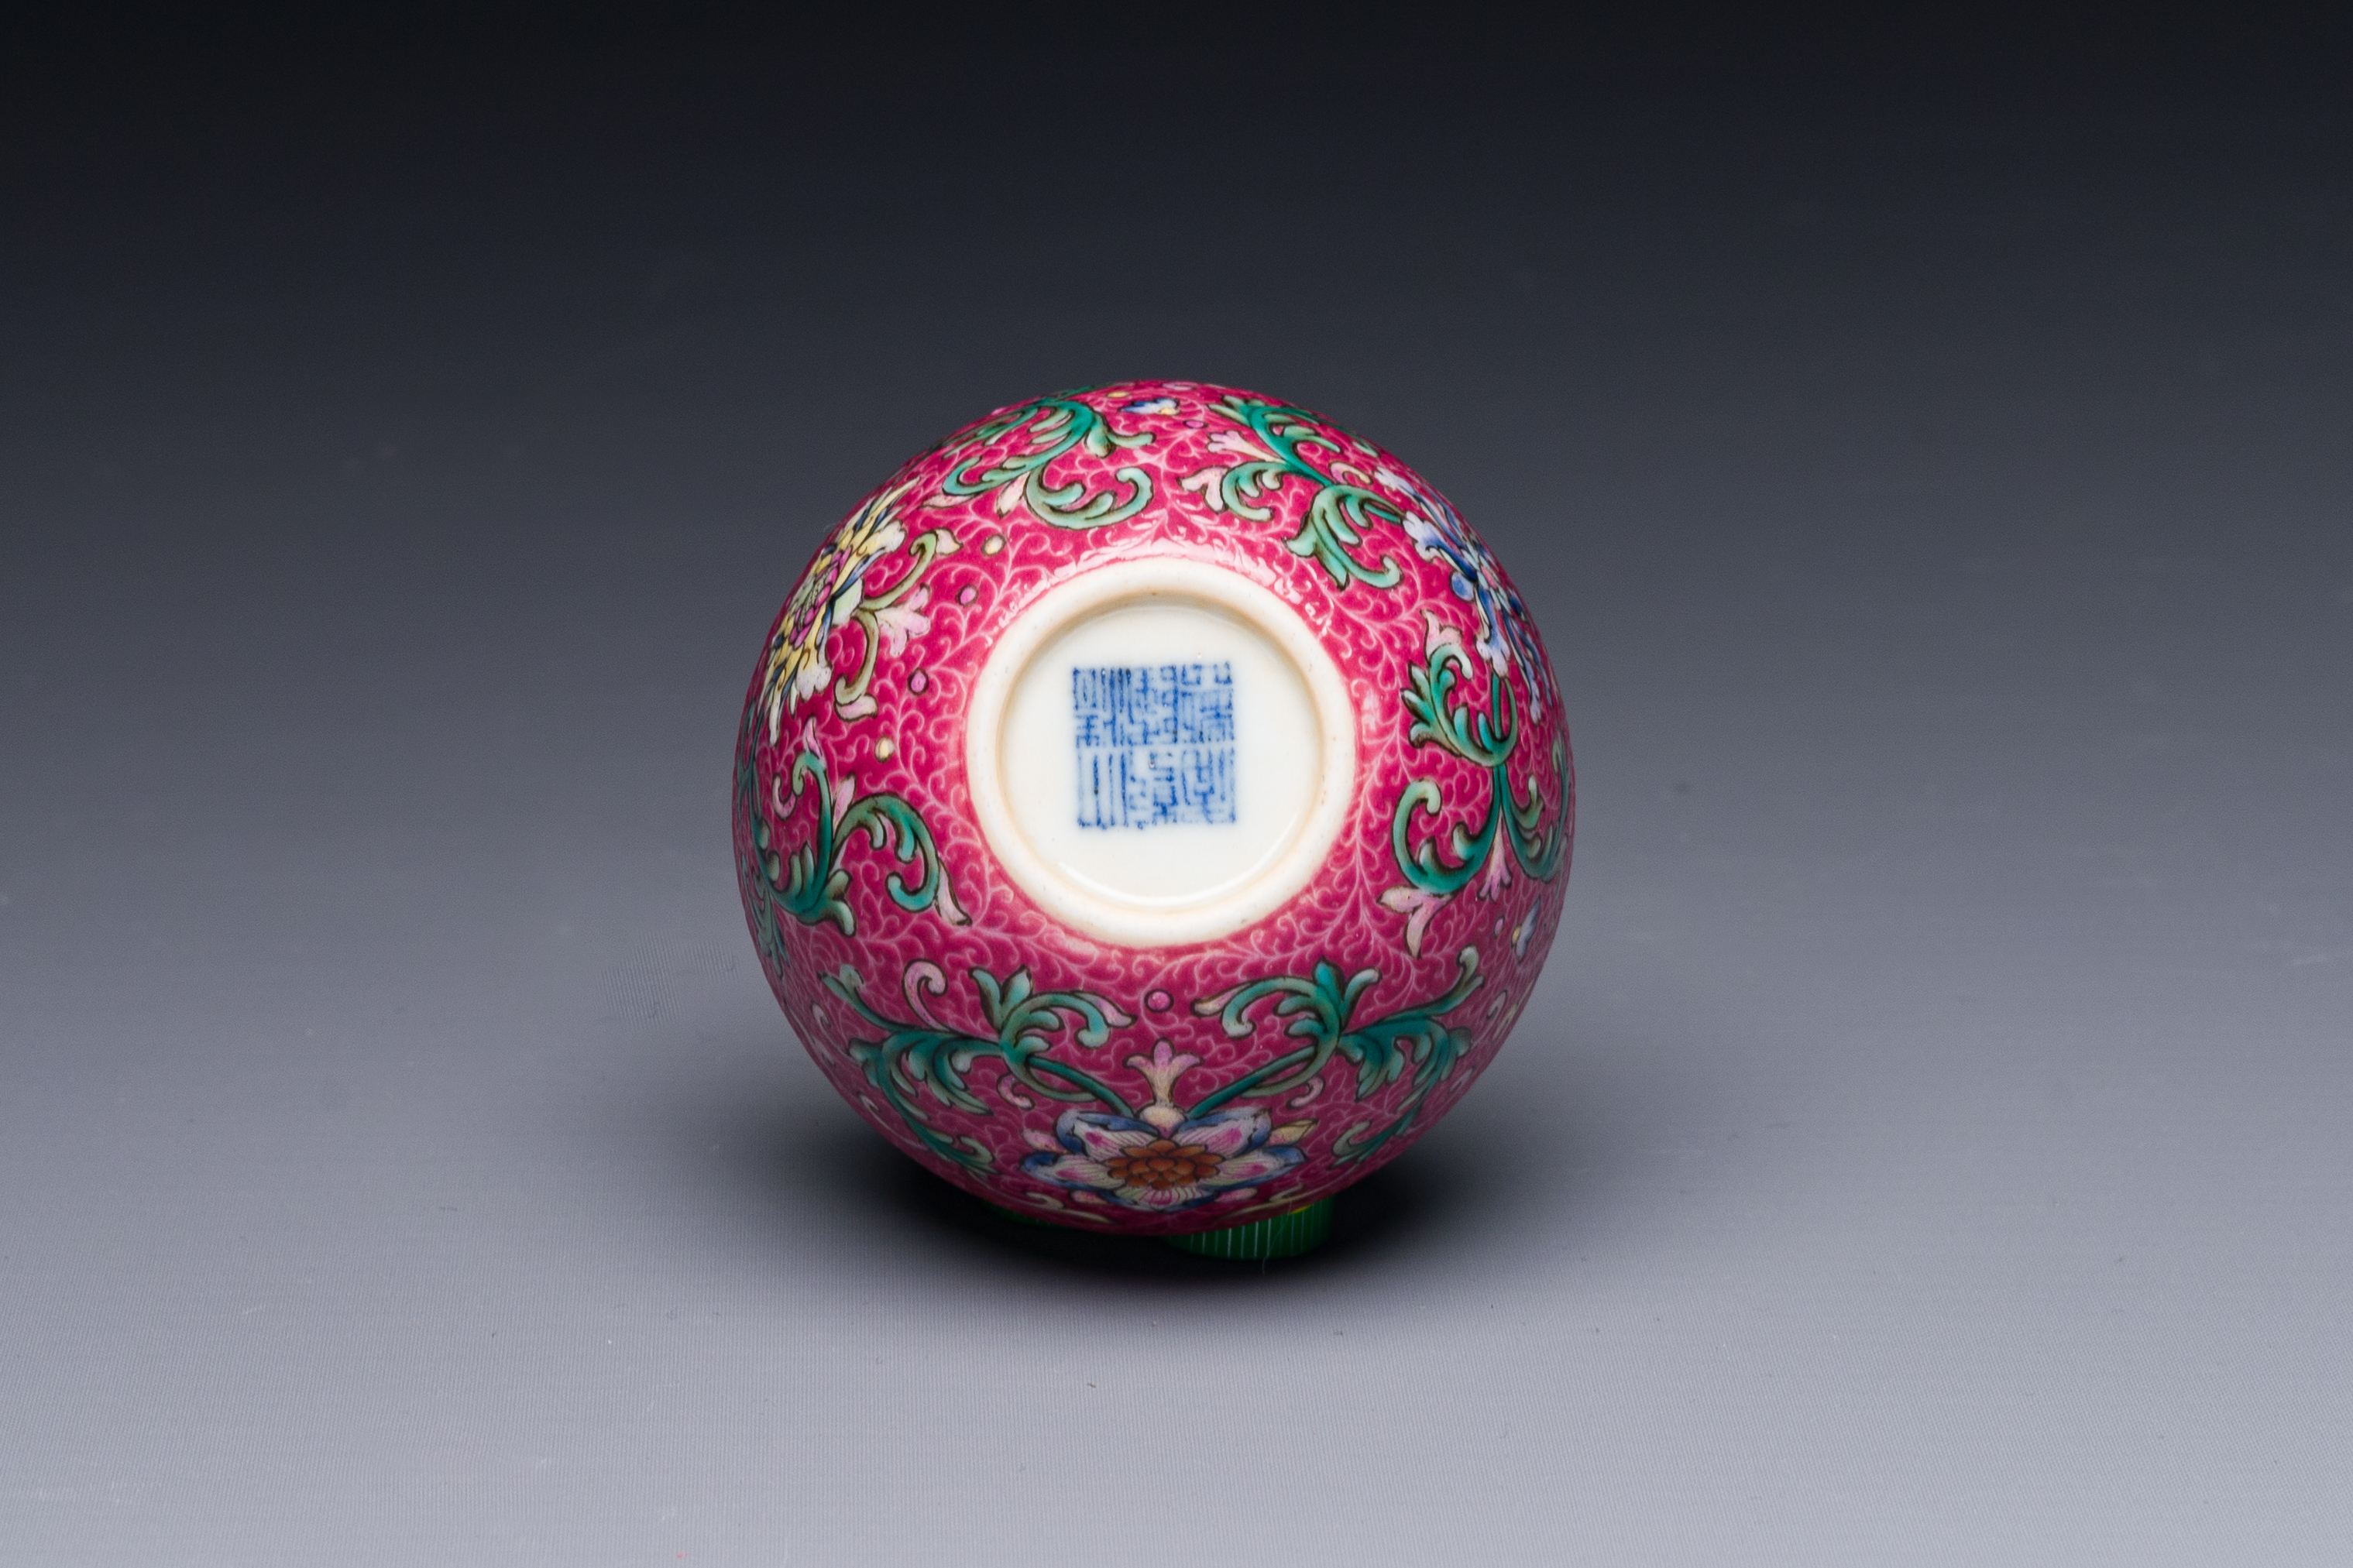 A fine Chinese pink-sgraffito-ground famille rose cup with floral design, Qianlong mark, 19th C. - Image 4 of 4